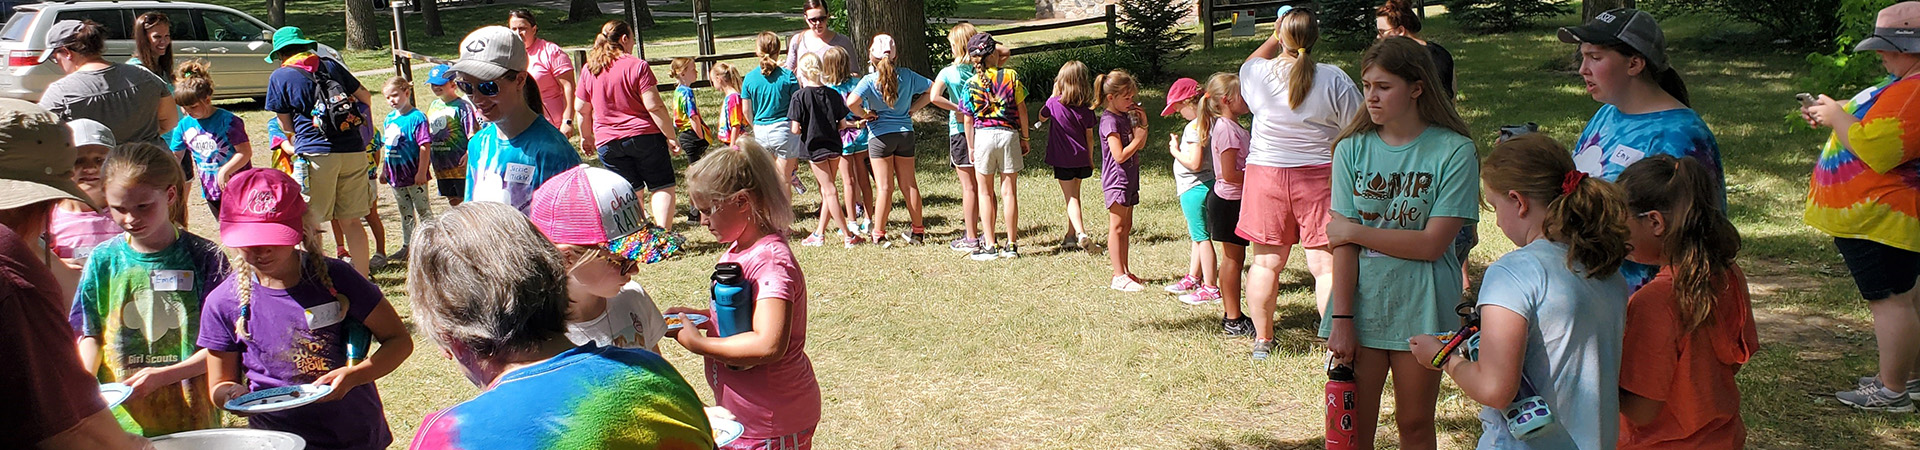  girl scouts at day camp standing in discussion 